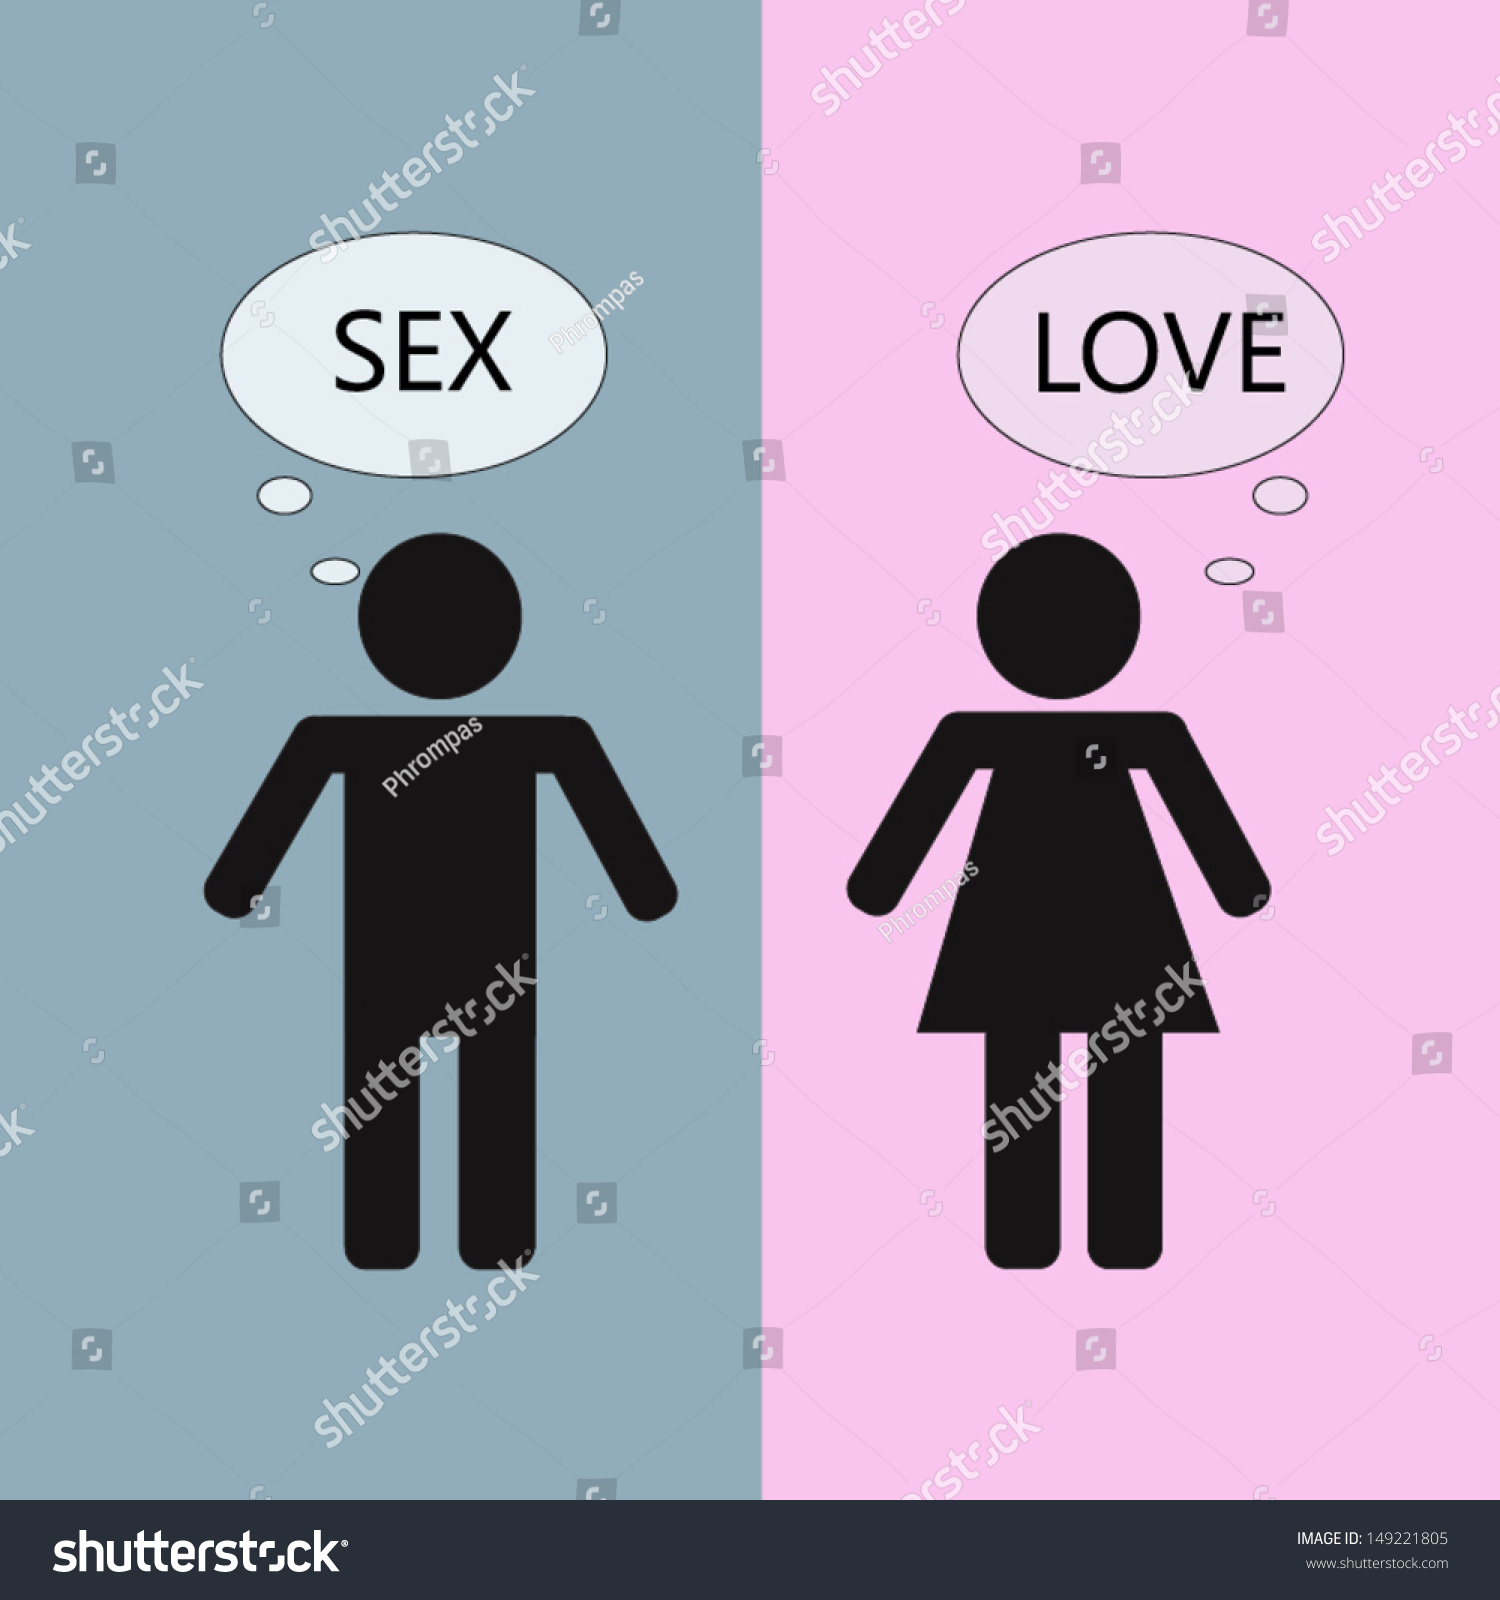 Man And Woman Thinking About Love And Sex Stock Vector Illustration 149221805 Shutterstock